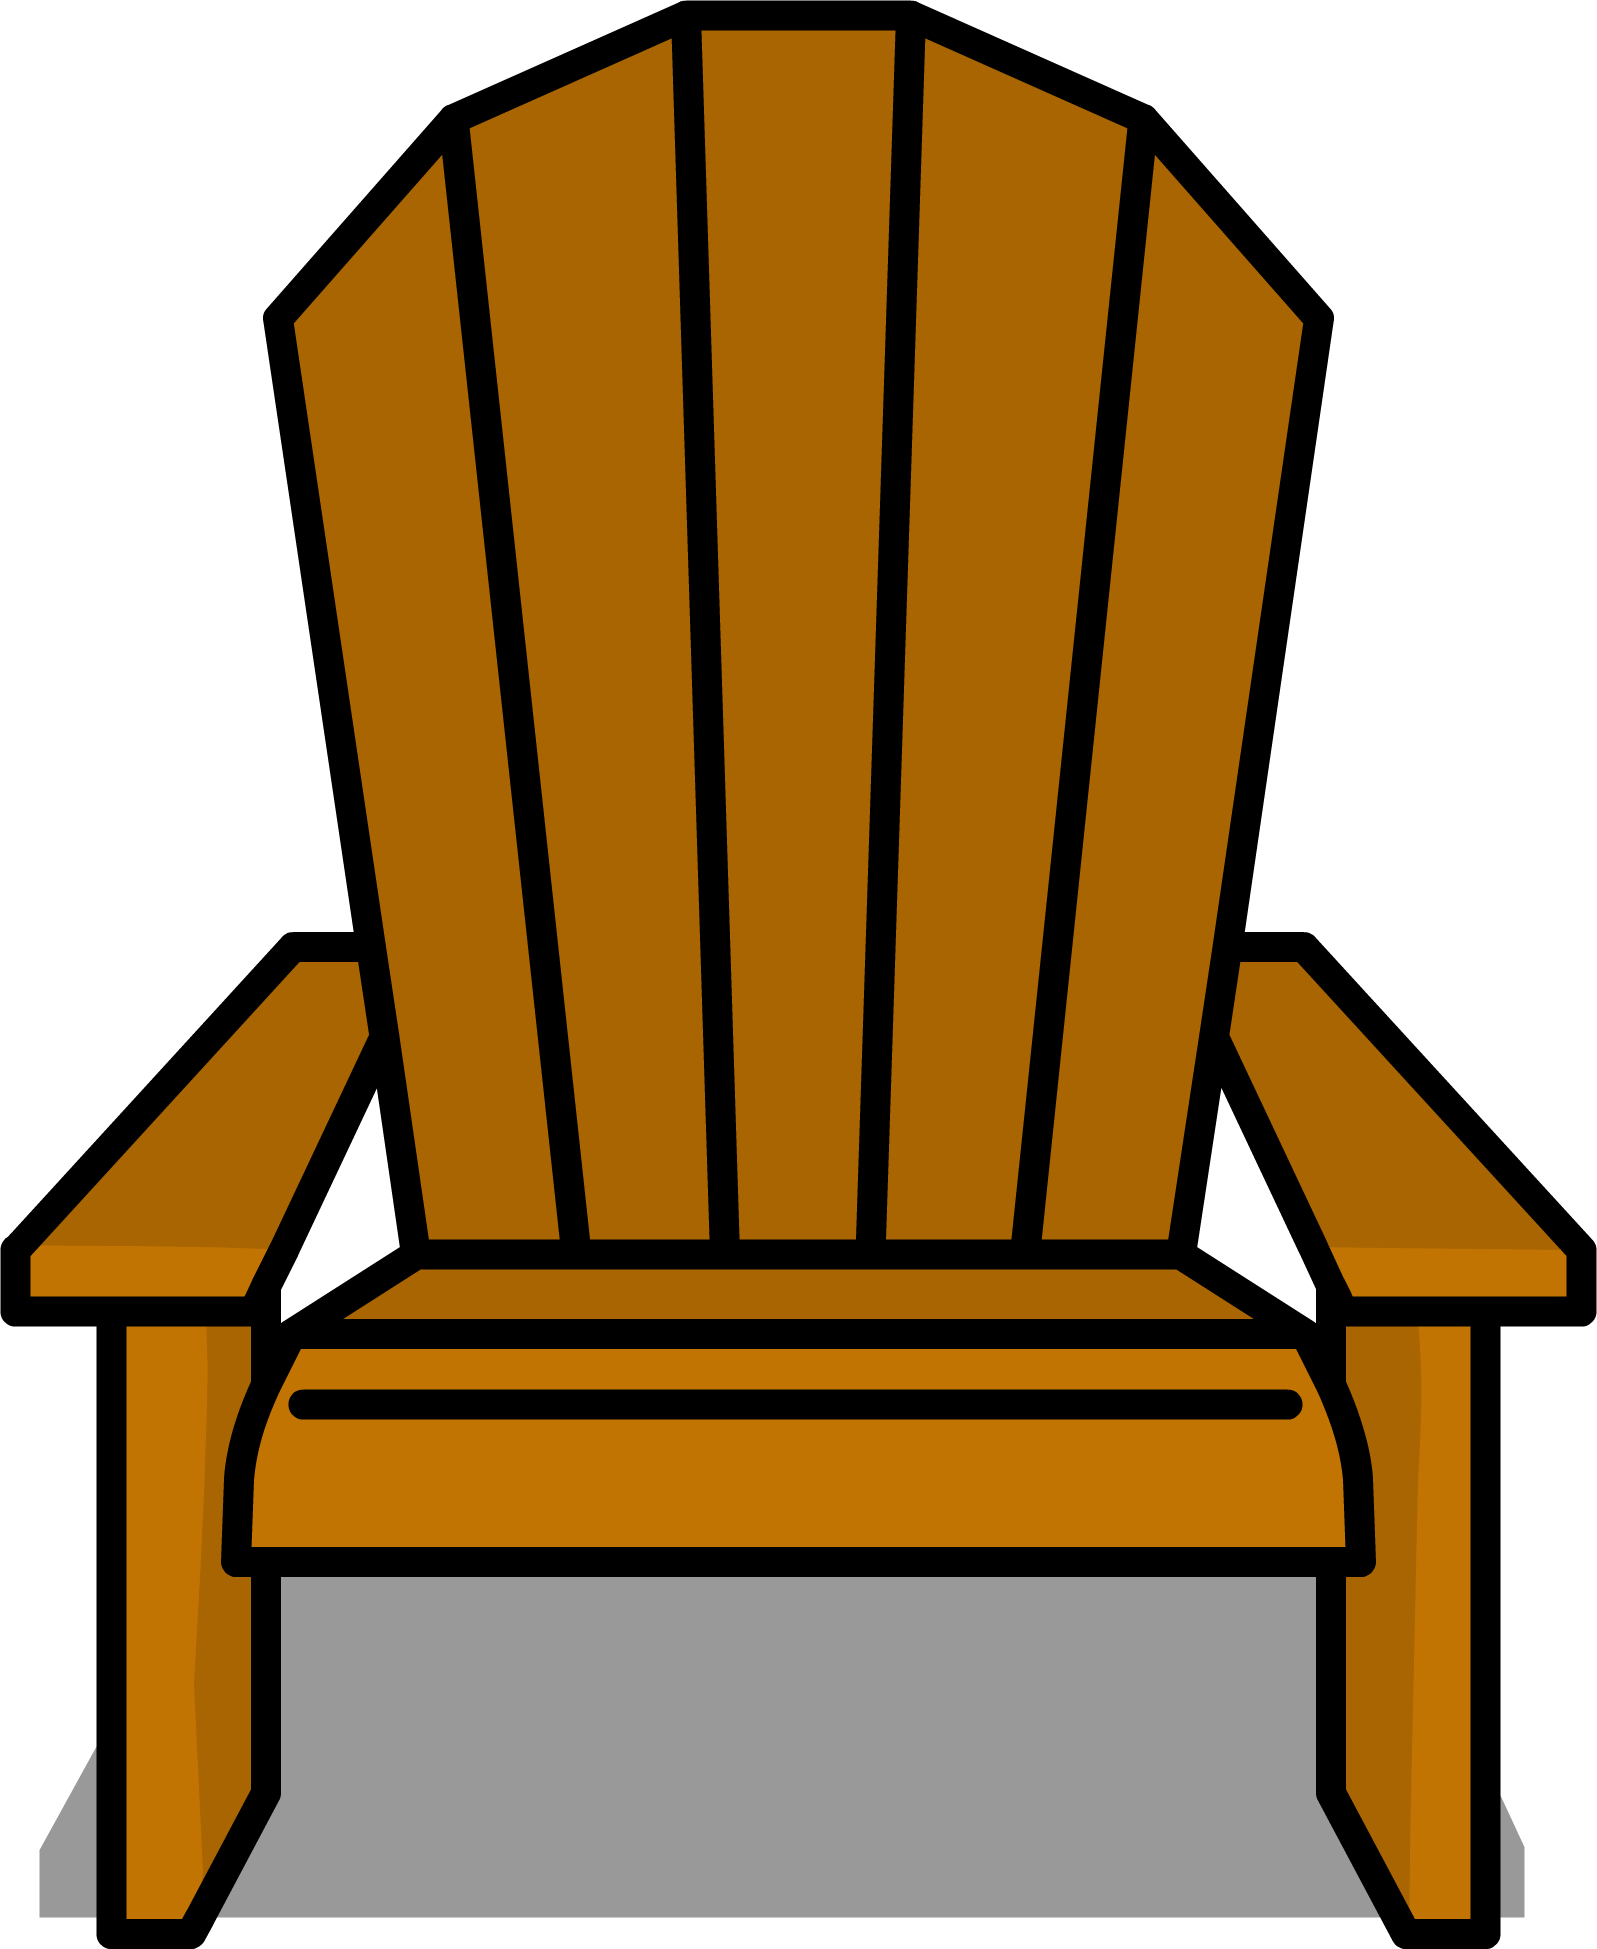 Lounging Deck Chair Sprite 001 - Chair (1597x1949)